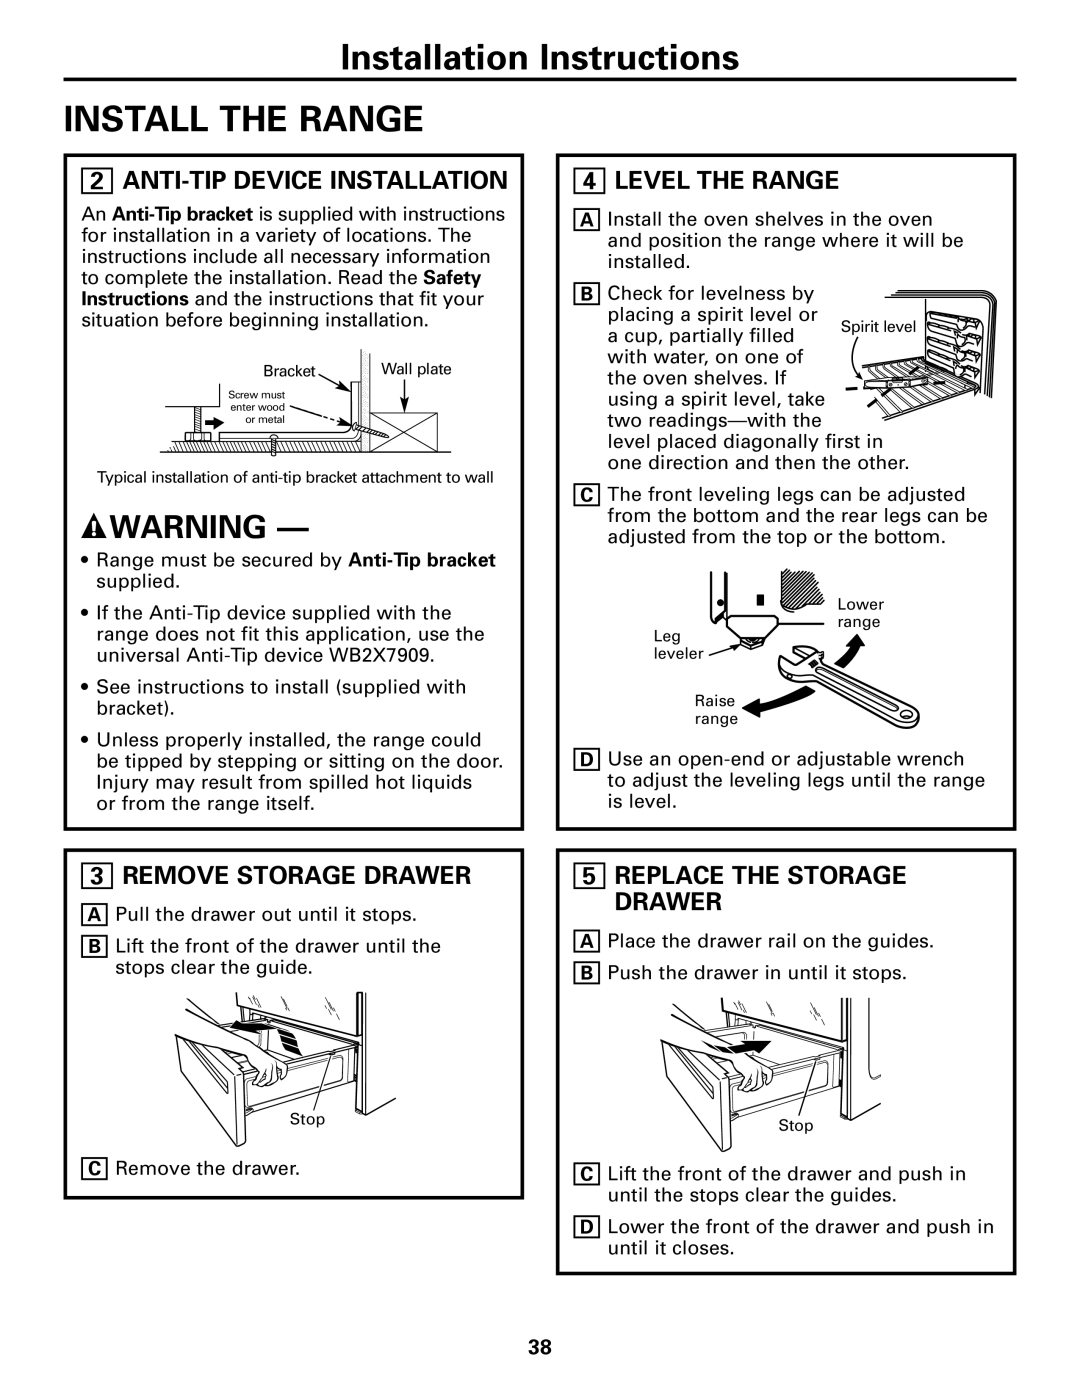 GE JCB968 Installation Instructions INSTALL THE RANGE, Anti-Tipdevice Installation, Level The Range, Remove Storage Drawer 